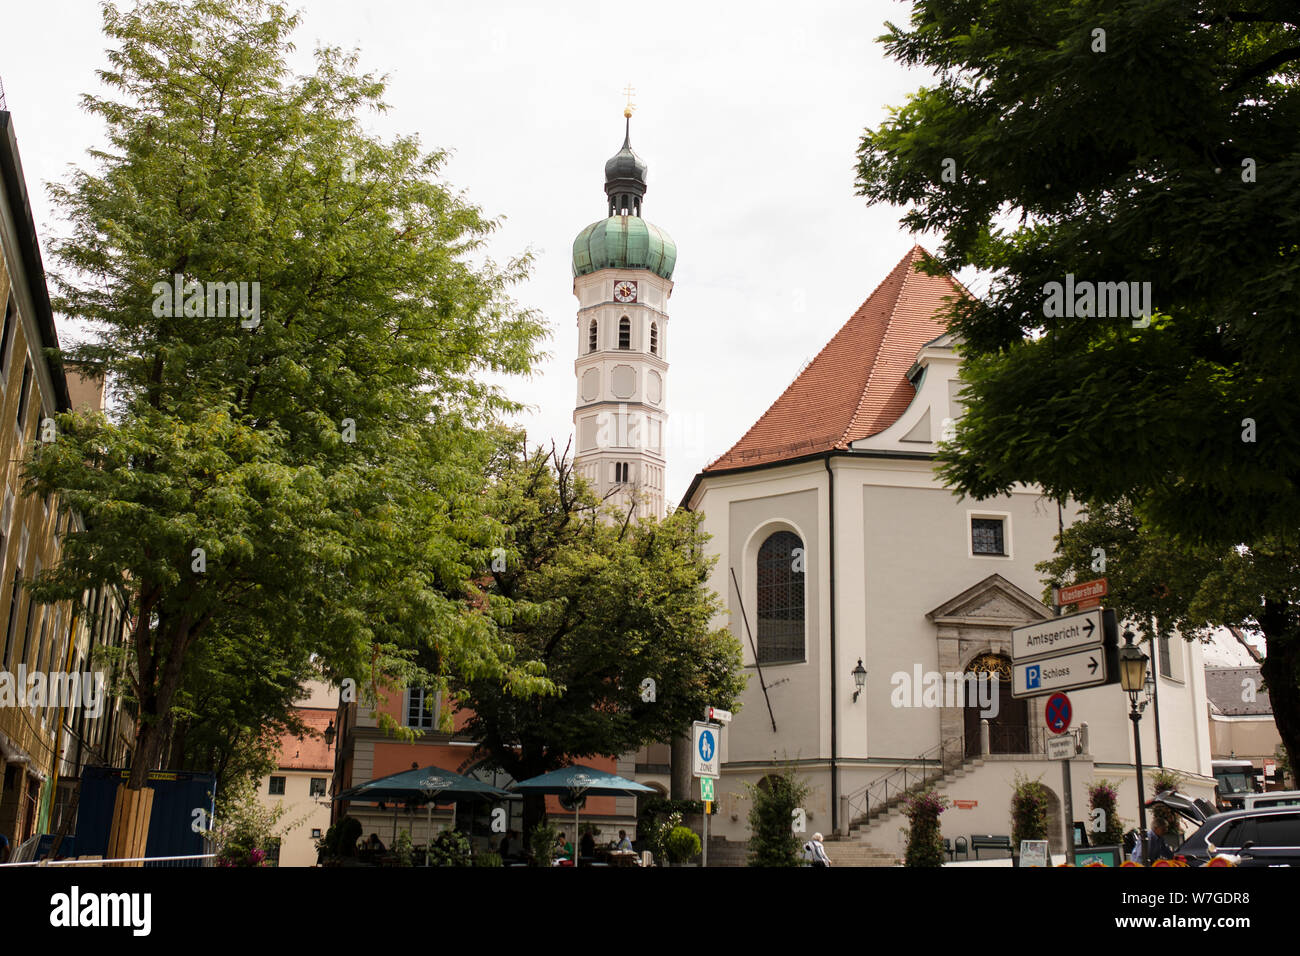 A view of St Jakob Catholic church from Augsburger Strasse in the Altstadt (old town) of the Bavarian town of Dachau, Germany. Stock Photo